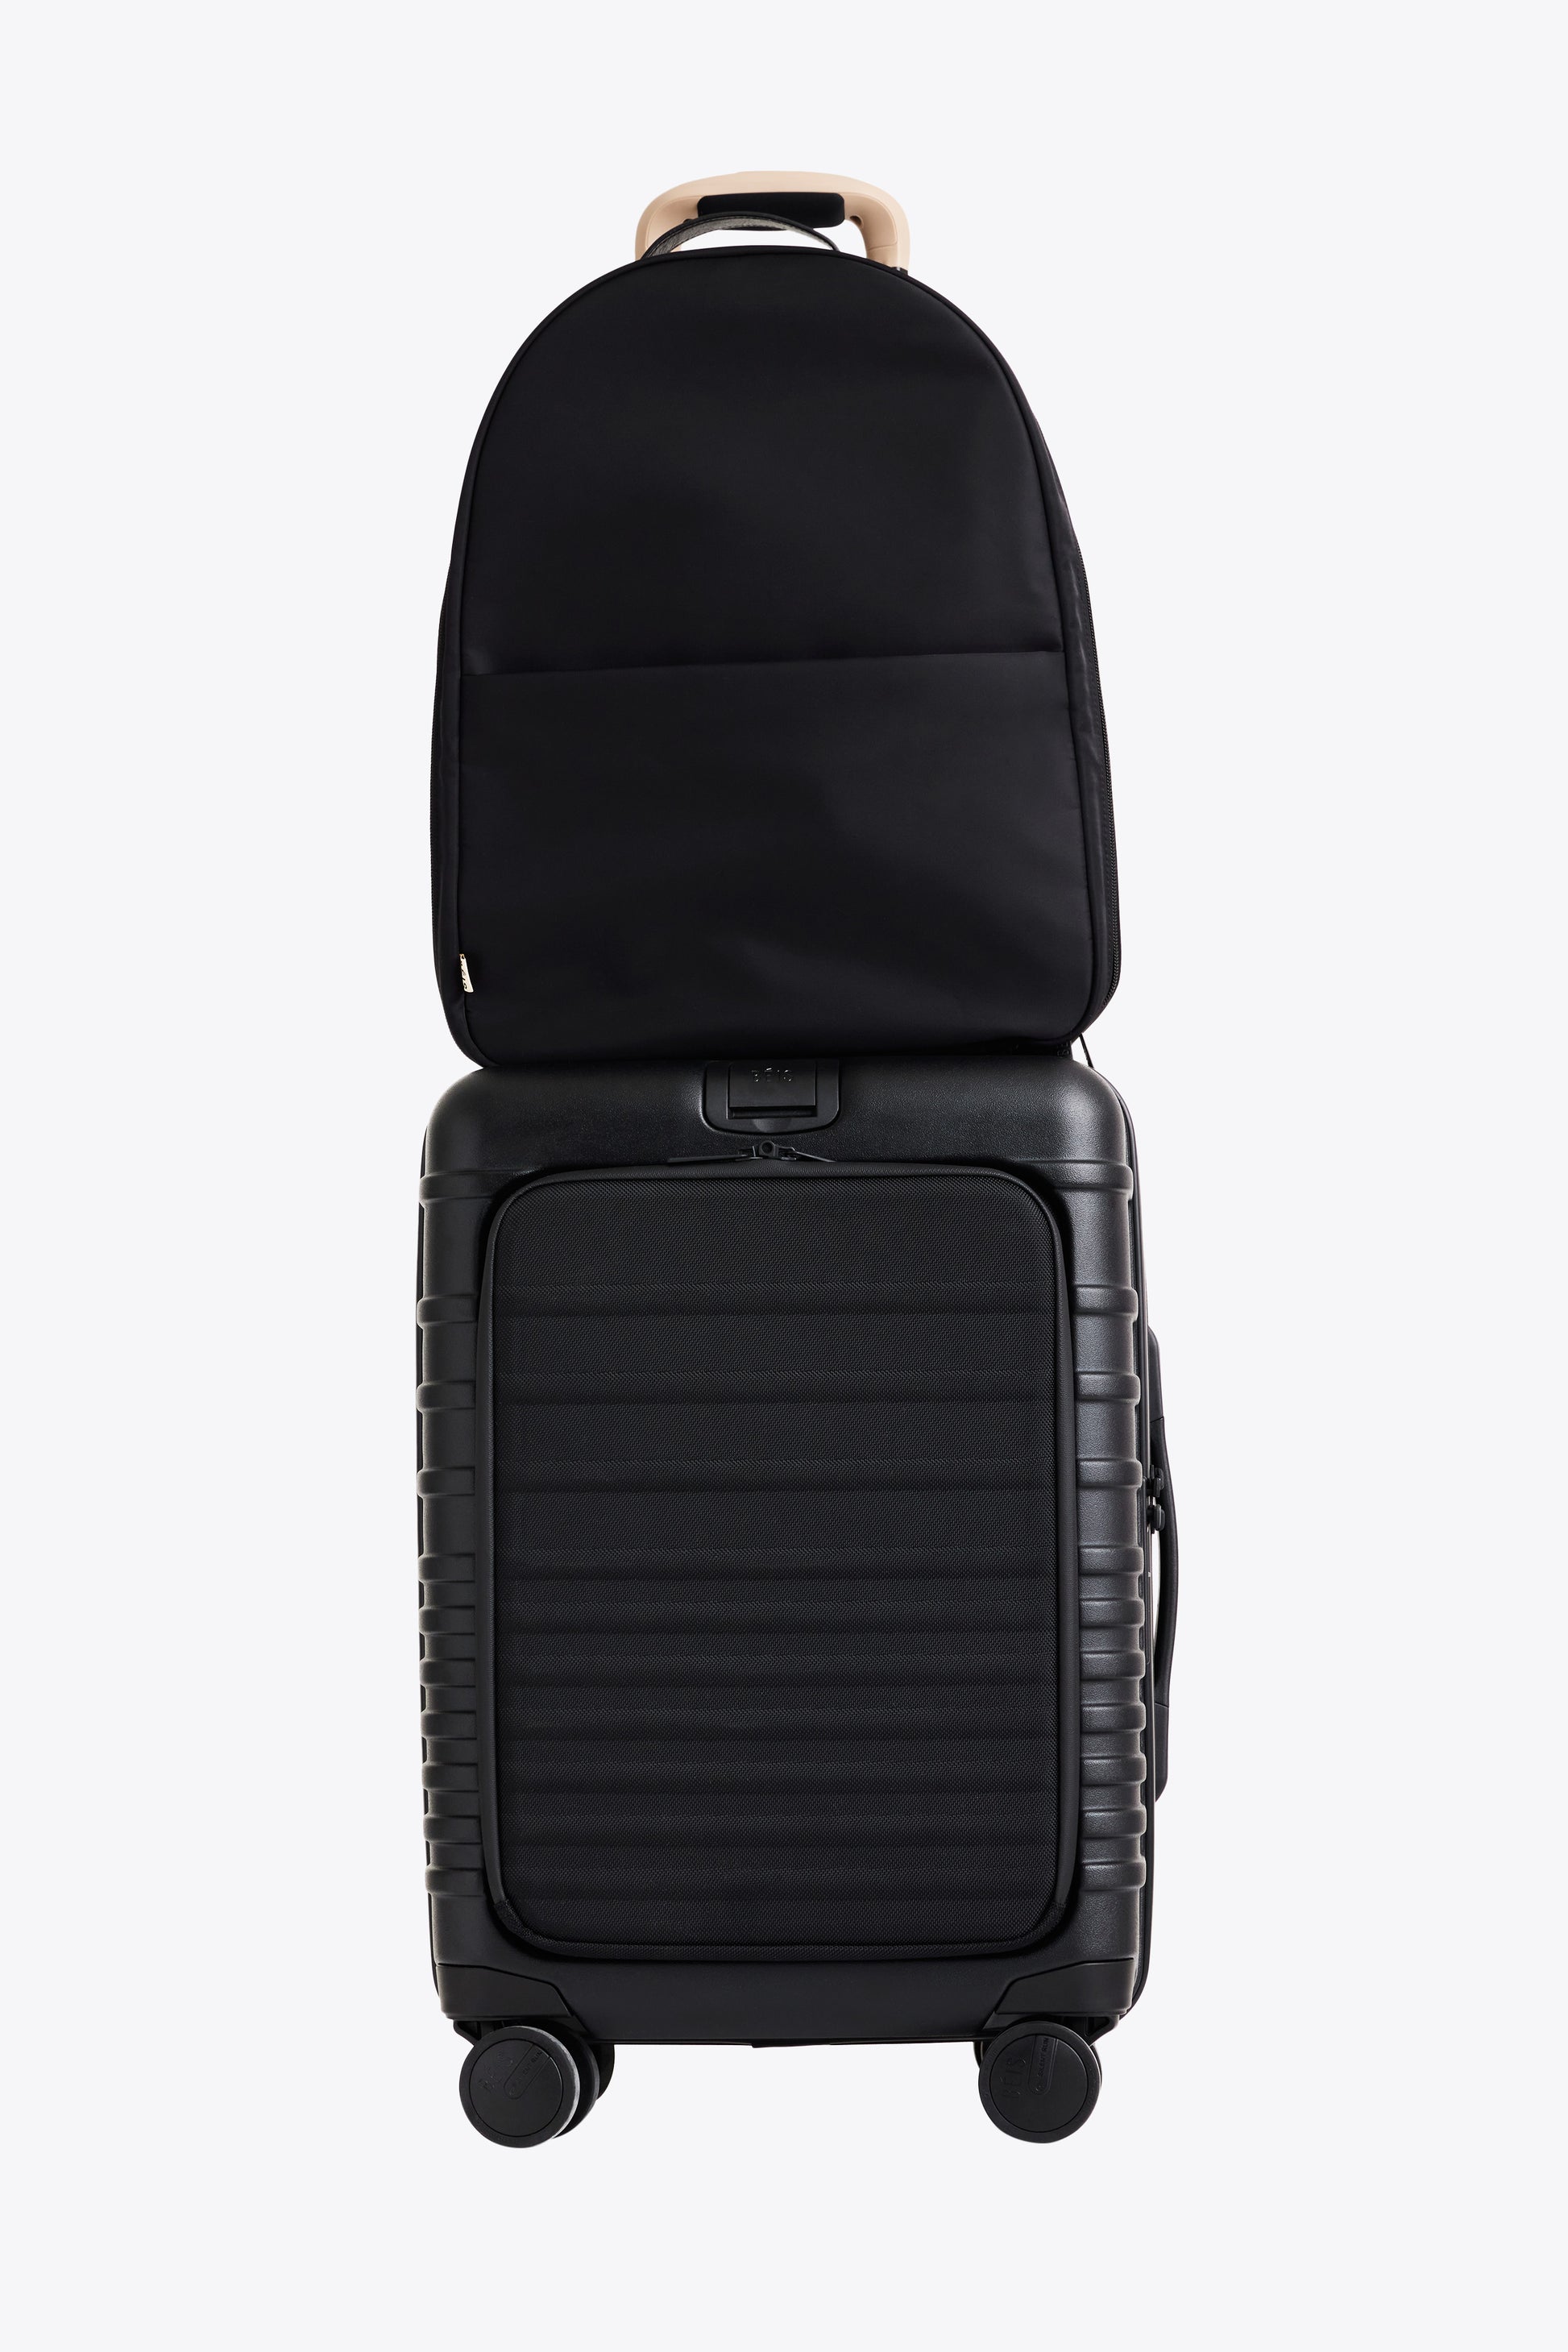 LOUIS VUITTON SoftSided Suitcase - More Than You Can Imagine